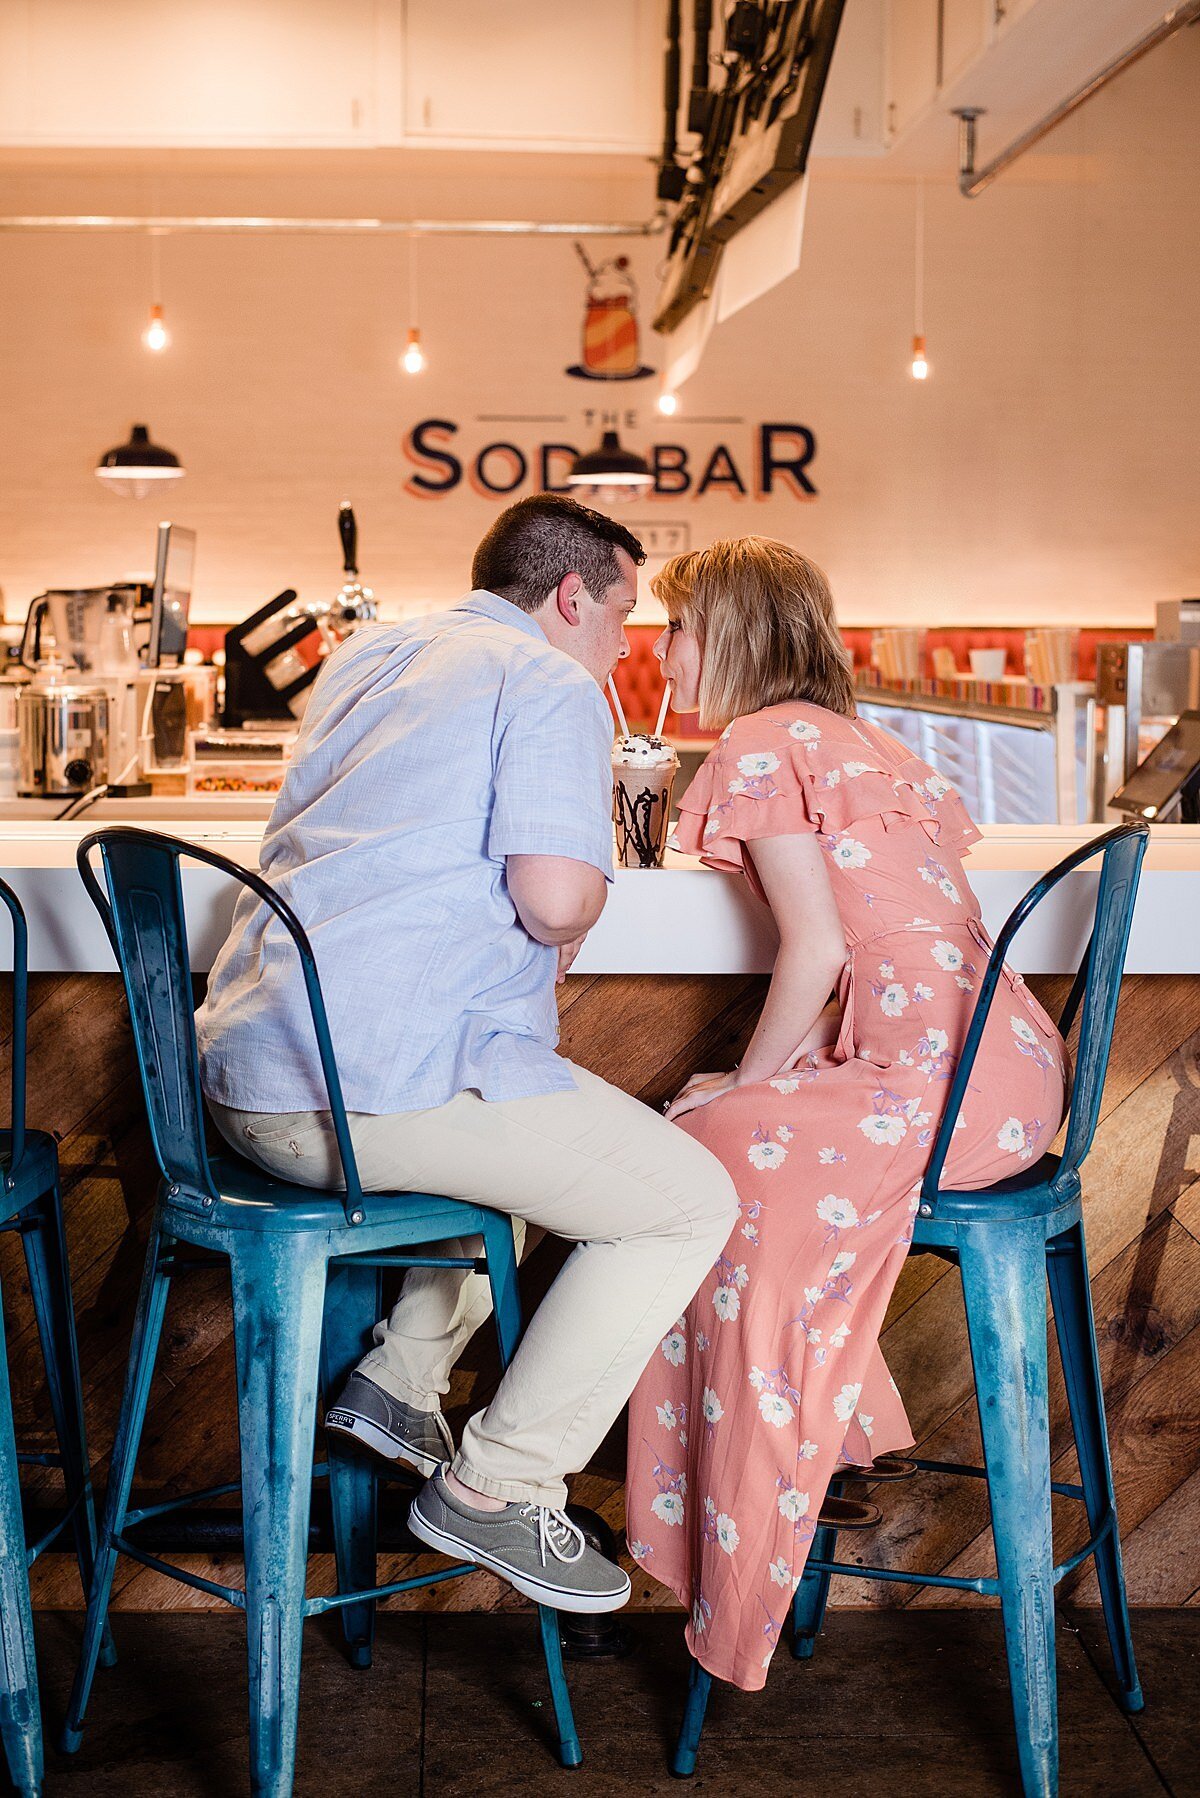 Couple sharing a milkshake outside of the Soda Bar in Murfreesboro TN, seated on two stools and sipping from straws